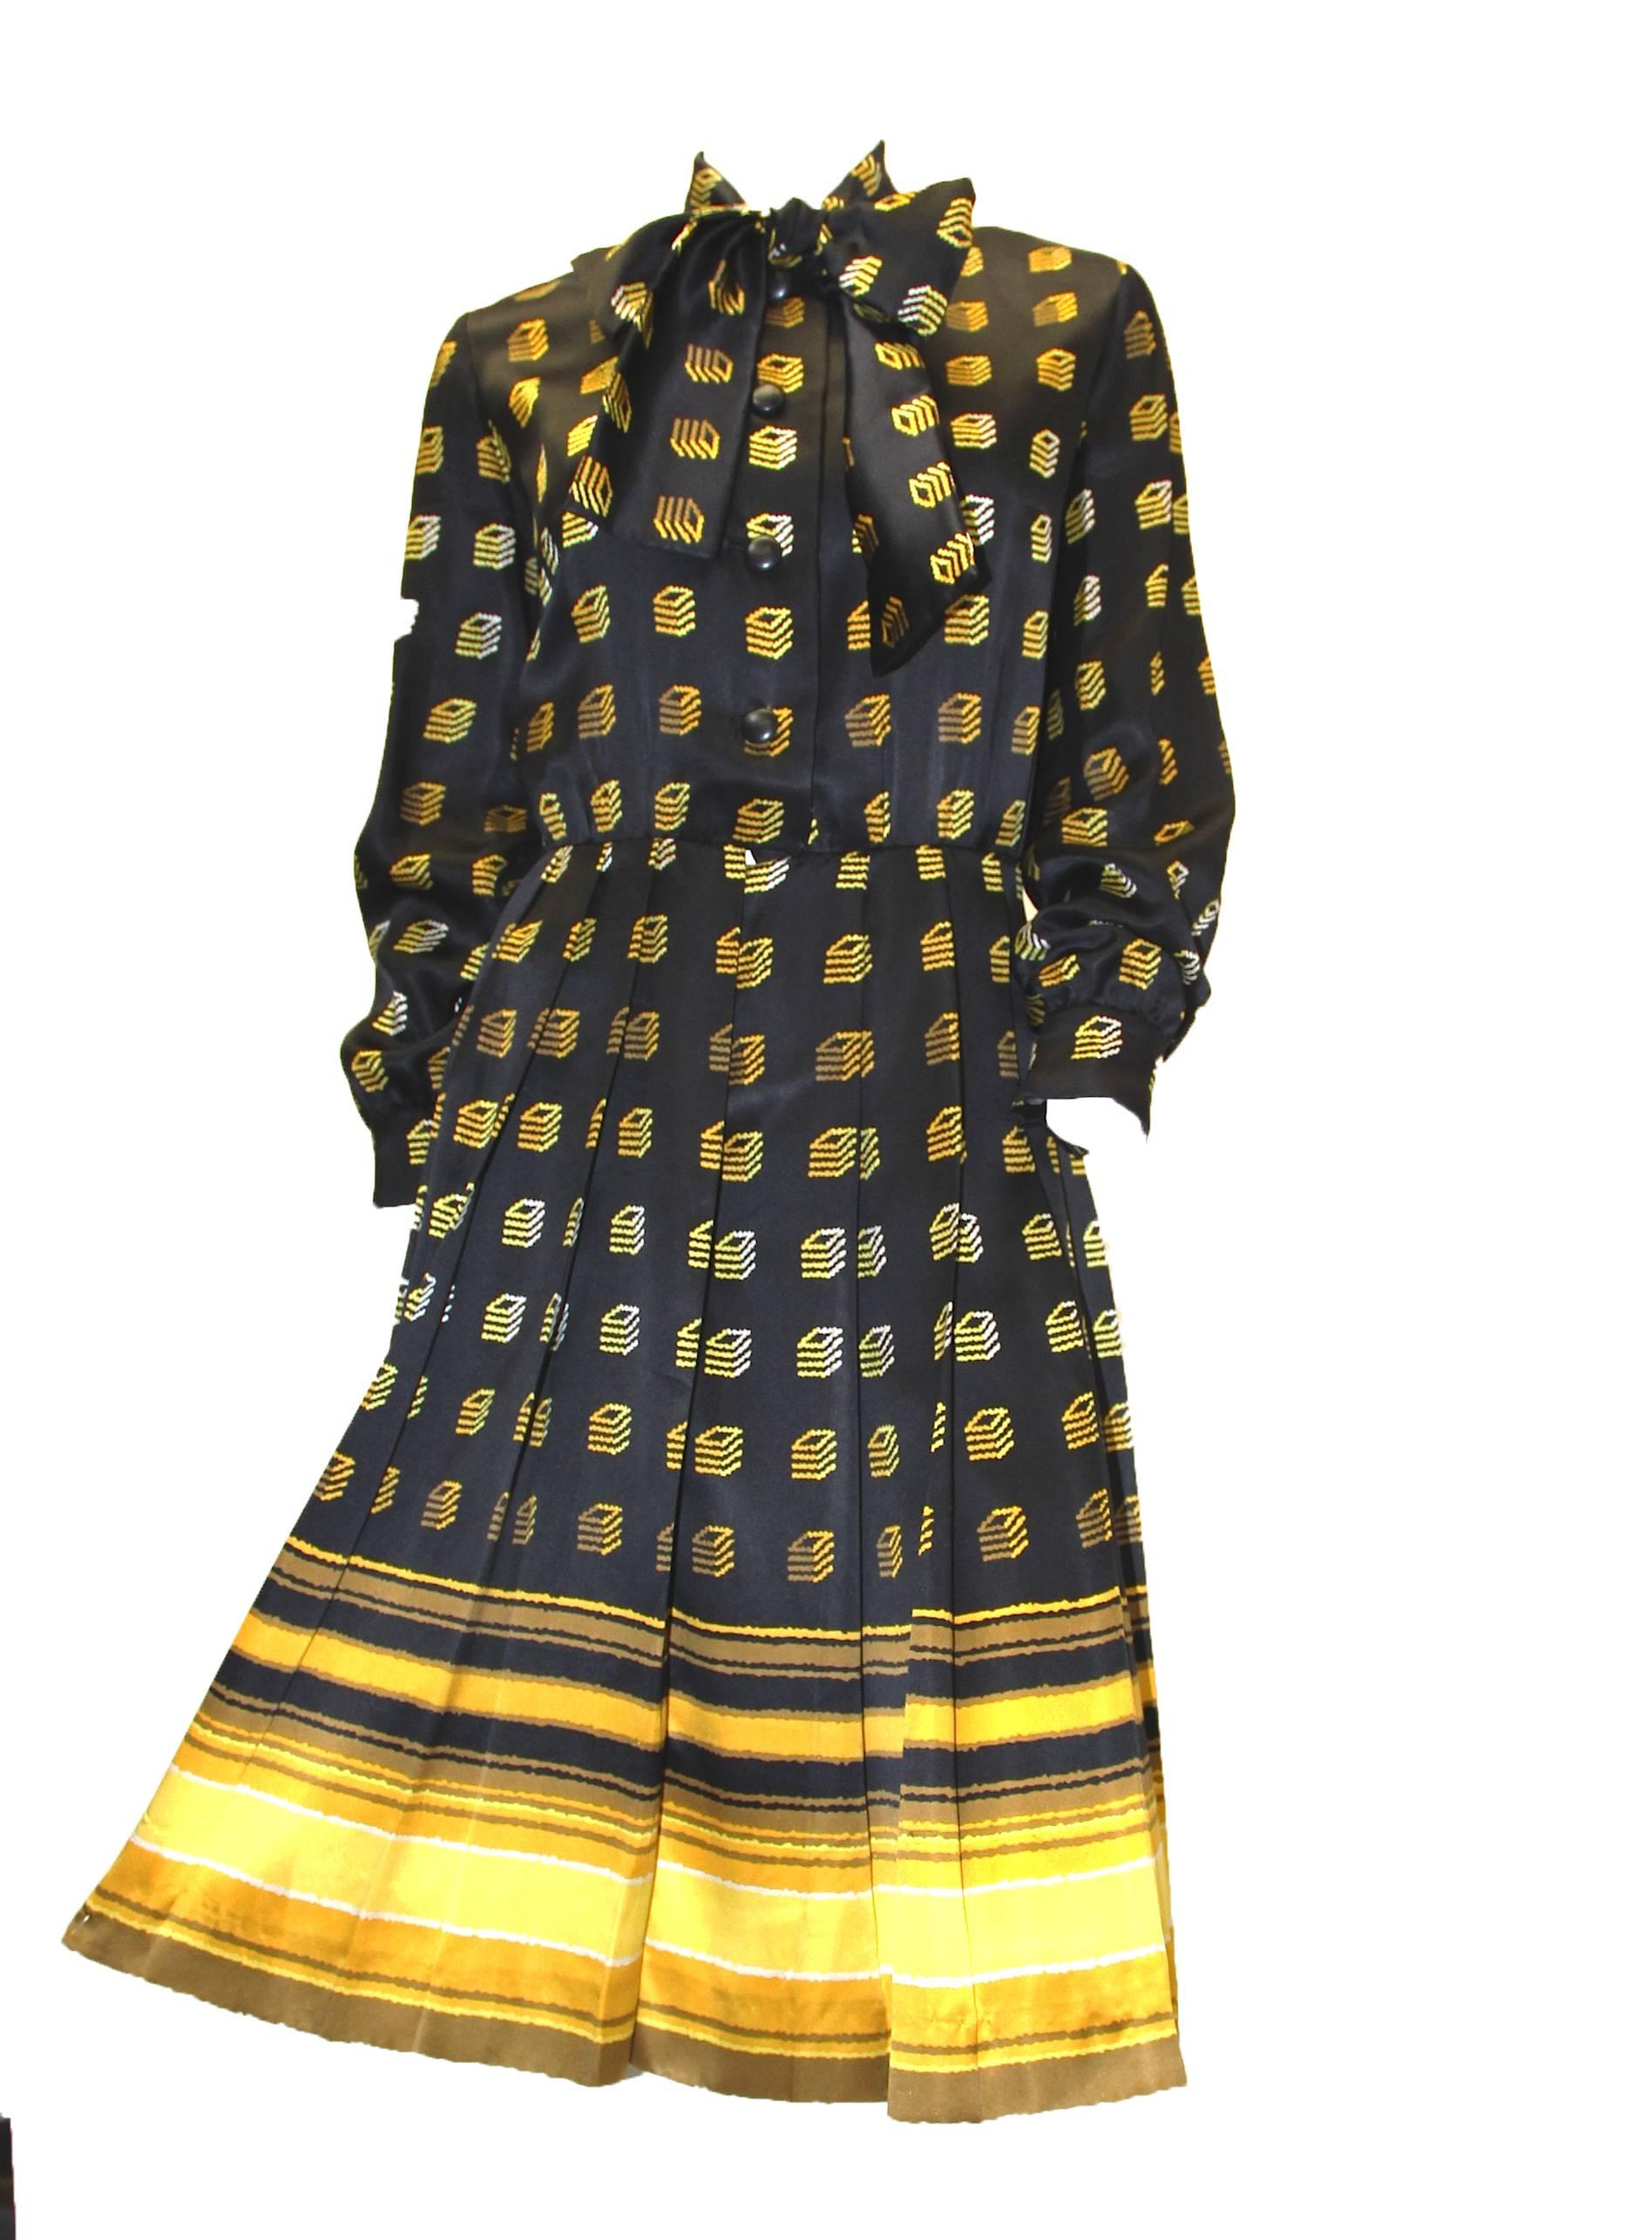 Givenchy 1960s Silk Knife Pleat Geo Print Dress. Front bow ties at neck, long sleeves.

Measurements:
Shoulder: 16